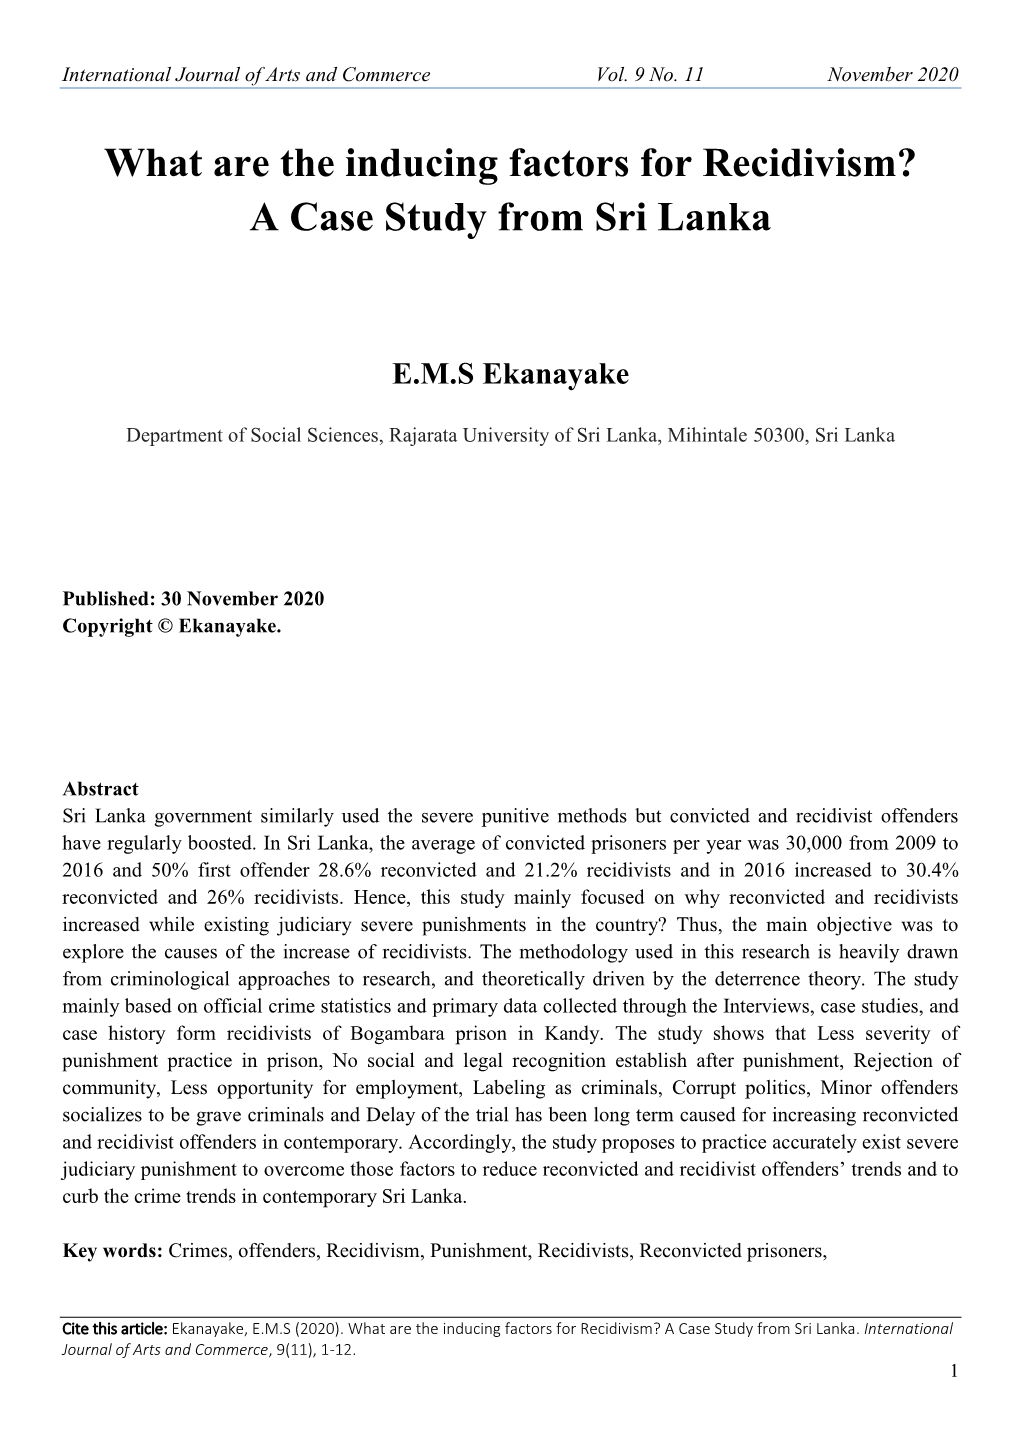 What Are the Inducing Factors for Recidivism? a Case Study from Sri Lanka